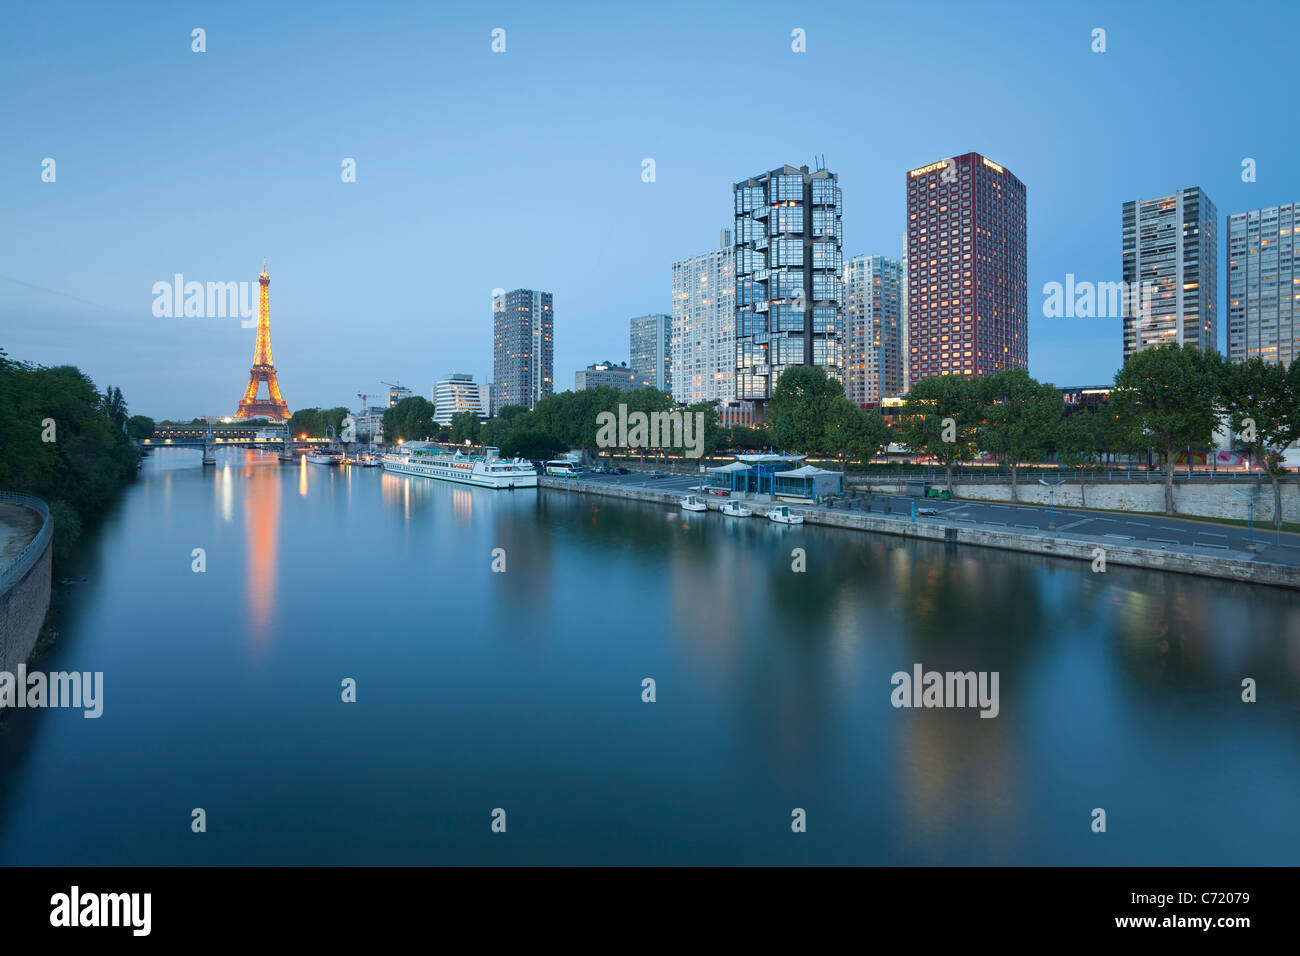 France, Paris, Night View Of River Seine With High-rise Buildings On The Left Bank And Eiffel Tower Stock Photo